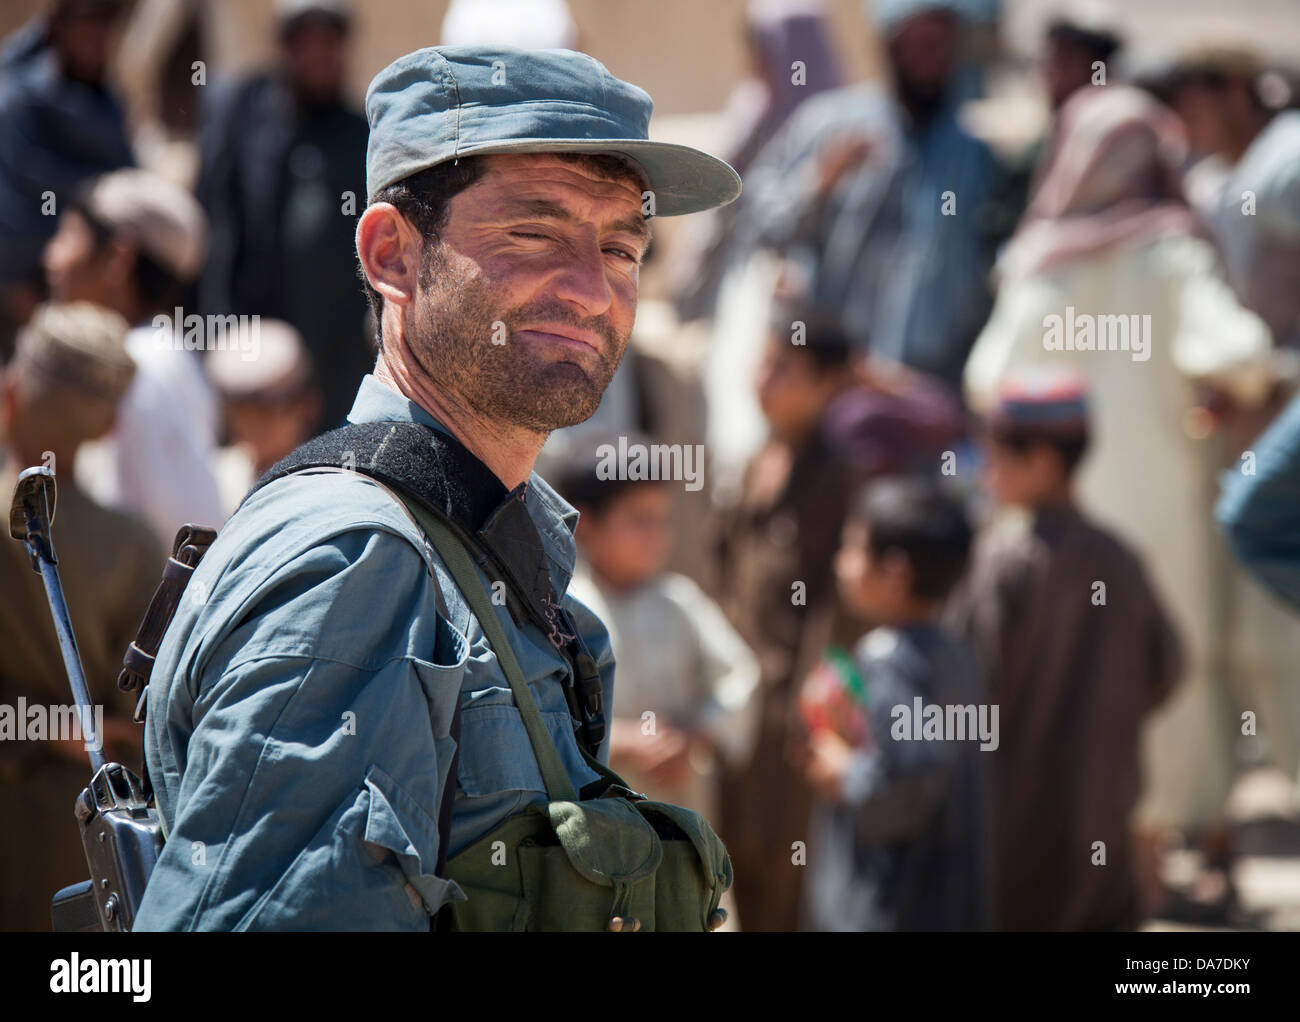 An Afghan National Civil Order Police officer provides security during a distribution of radios and comic books to residents May 26, 2013 in Delaram, Helmand province, Afghanistan. Stock Photo